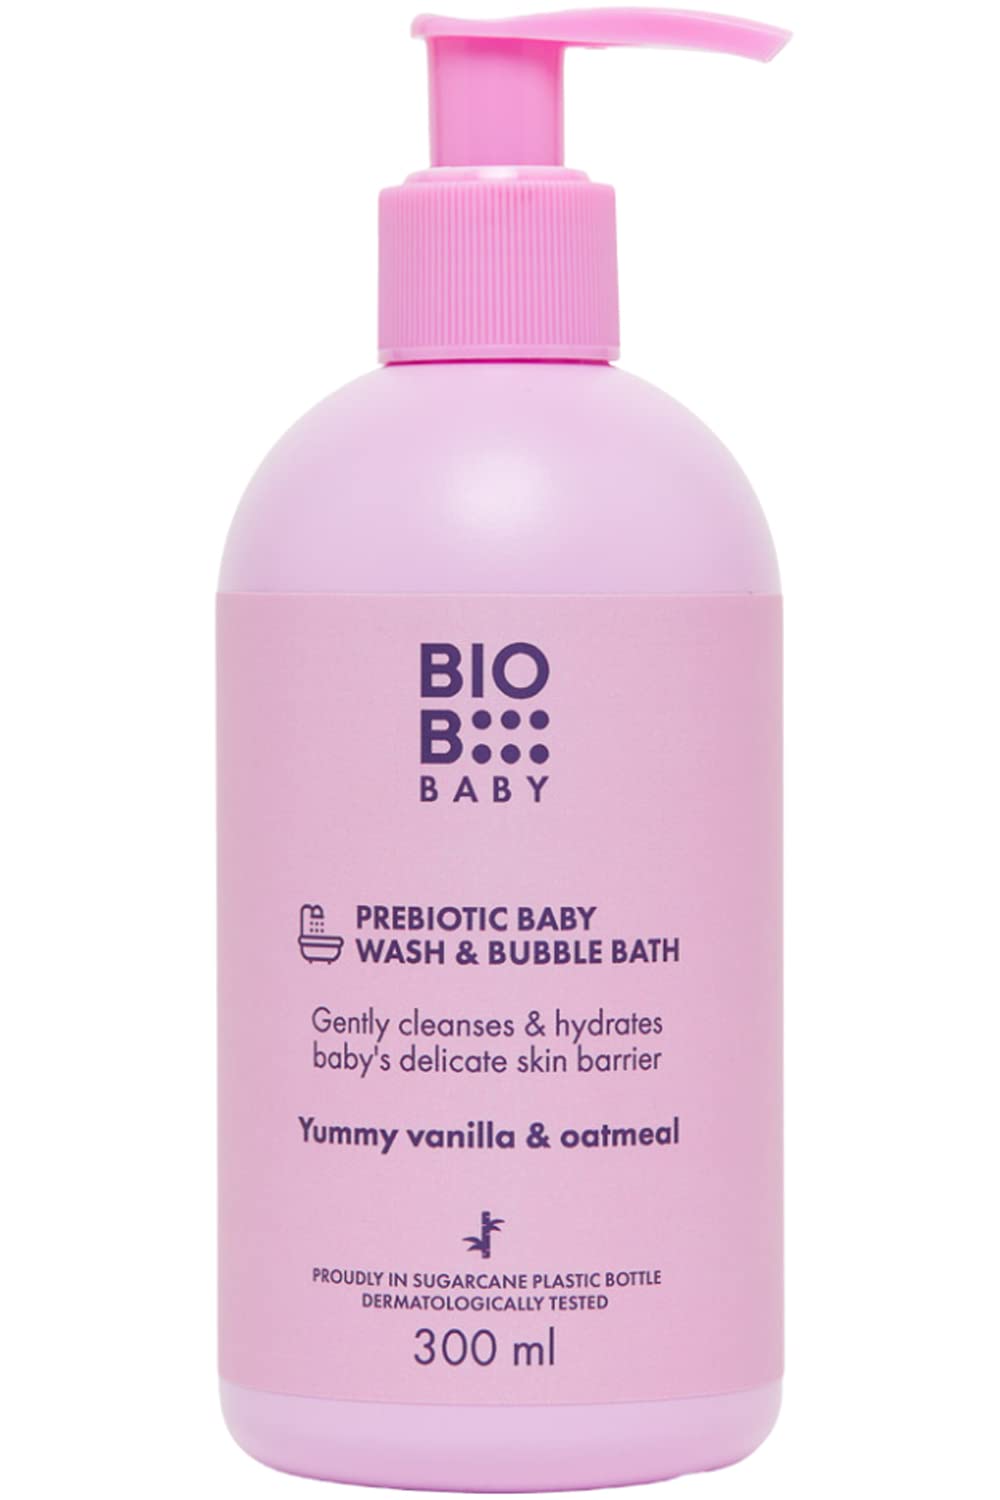 BioB Baby Body Wash and Bubble Bath with Prebiotics - Bath Bubbles for Kids  - Oatmeal Bath Baby Eczema Body Wash for Newborn and Toddler - Sensitive  Skin Foaming Soap for Baby